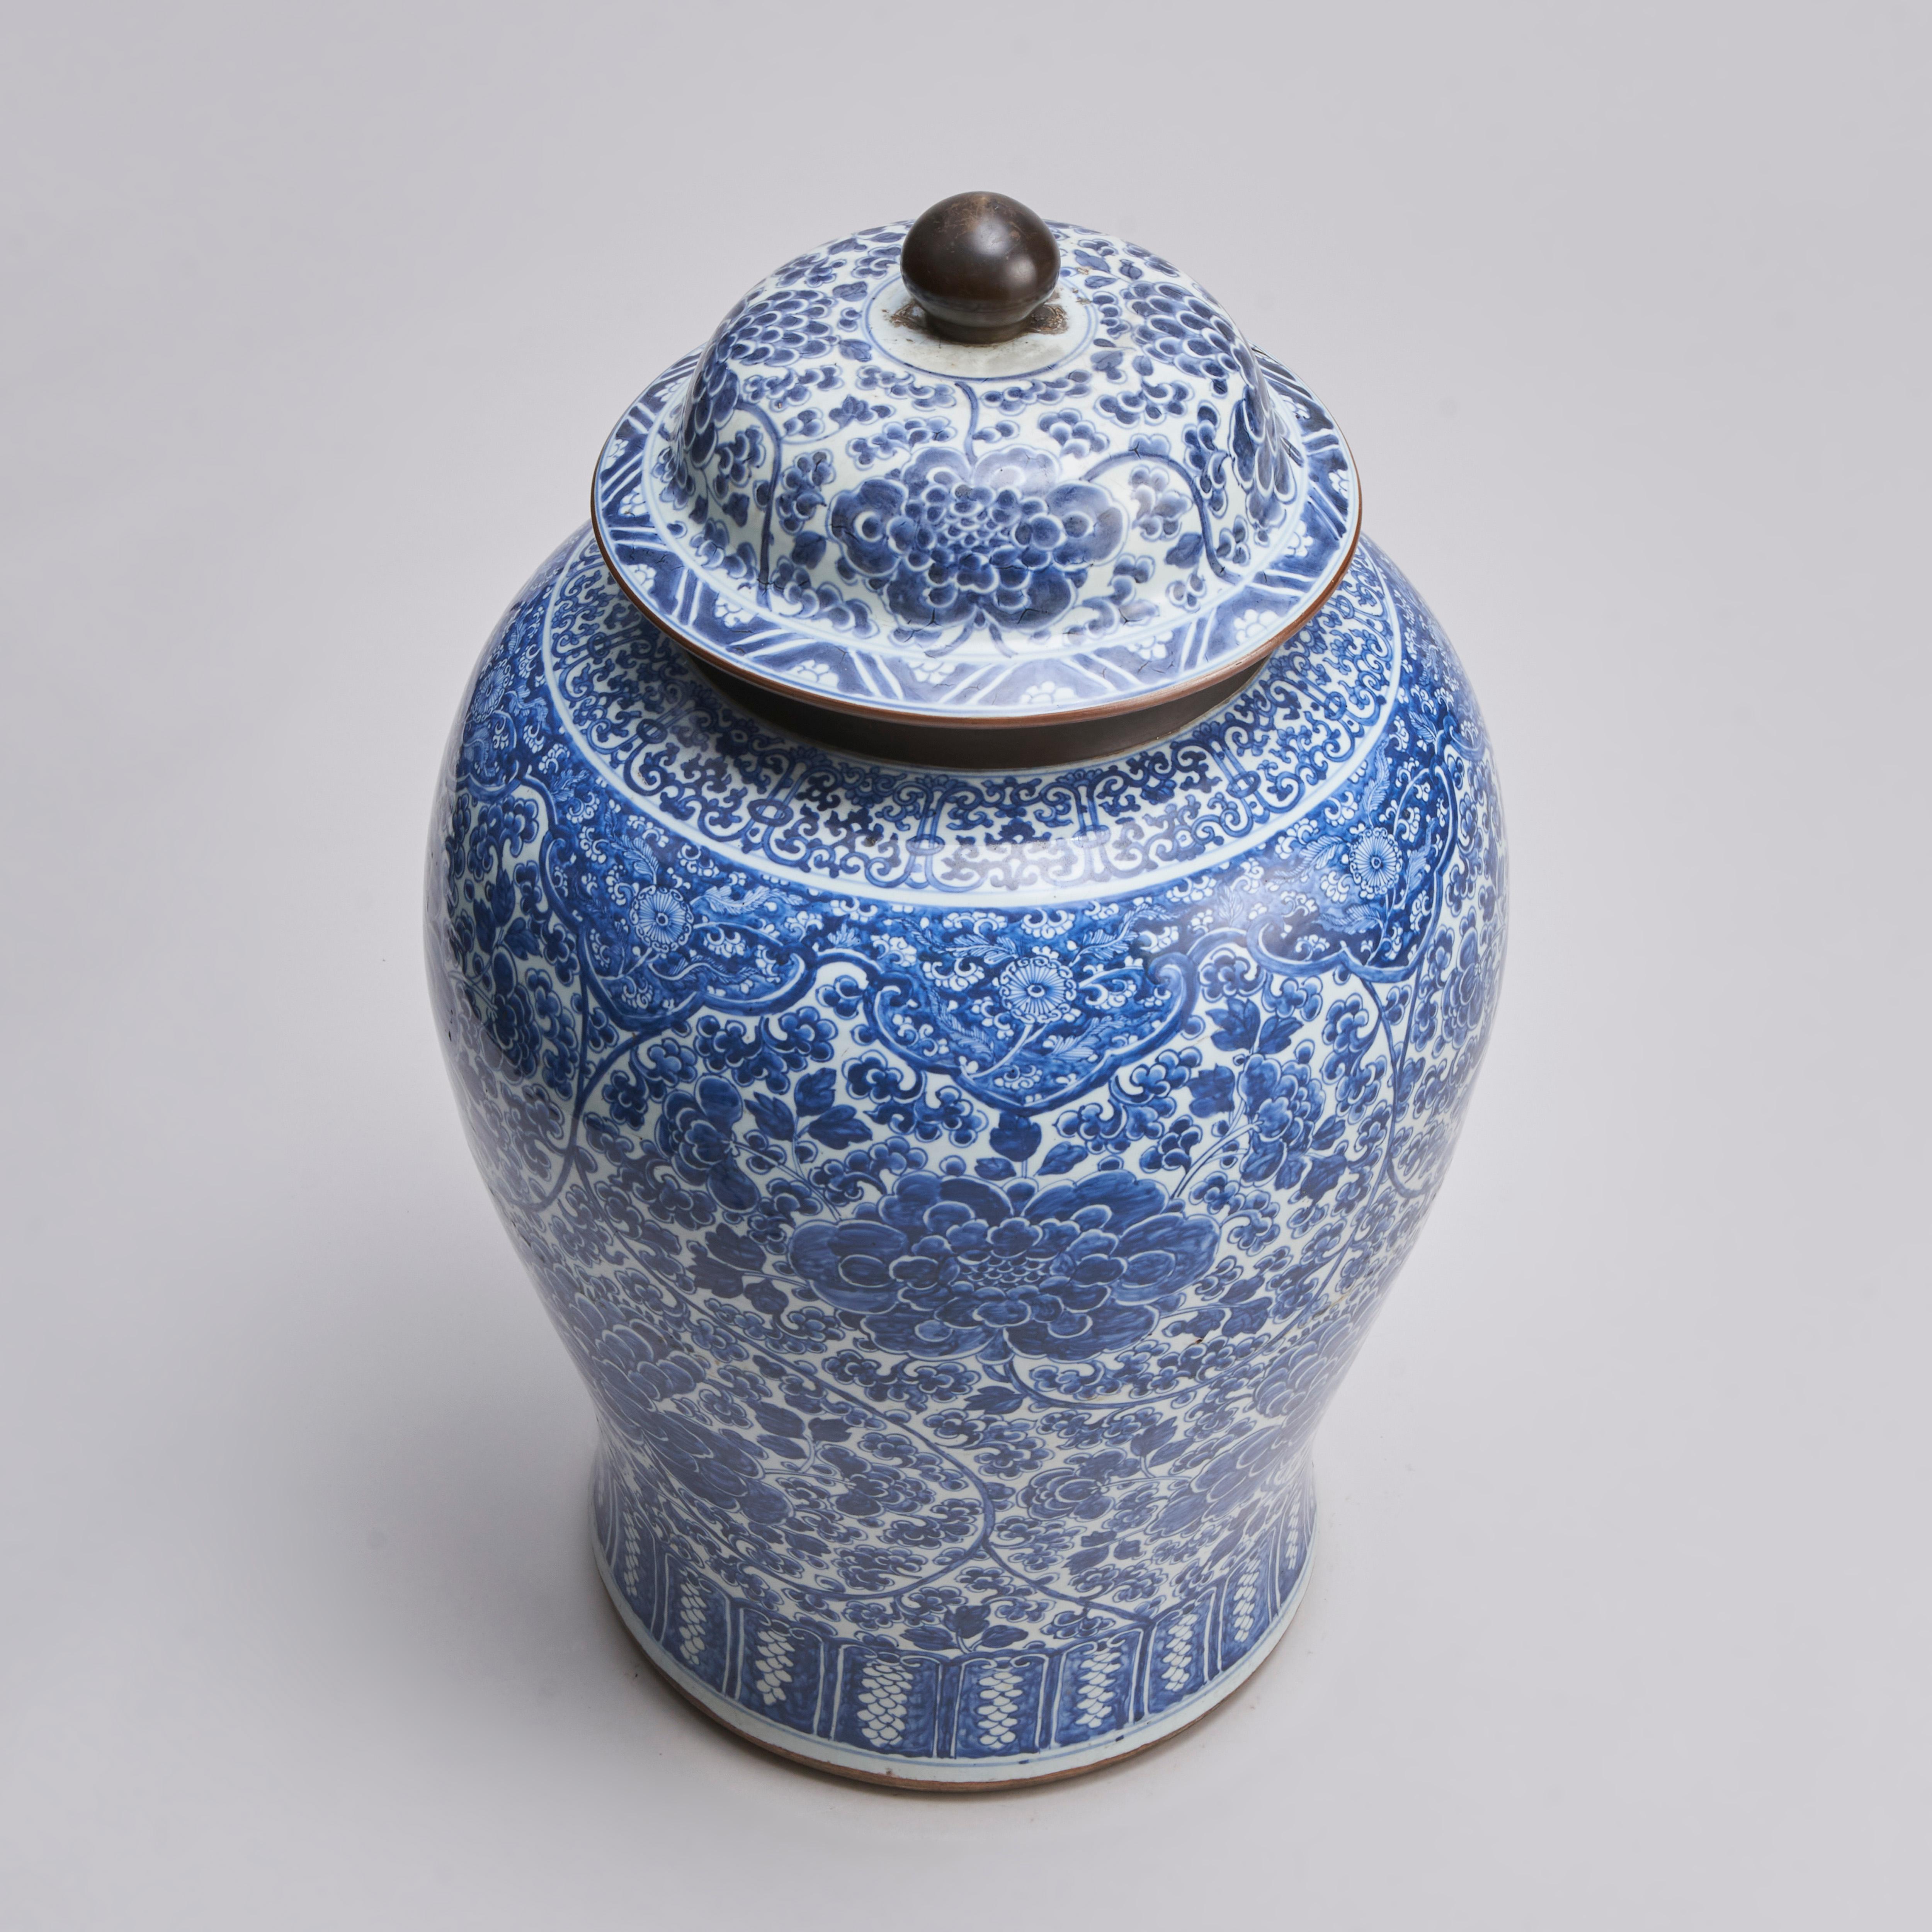 A large 19th century Chinese blue and white temple jar and cover with intricate decoration of large blousey peonies on a foliate ground. The rim and knop of the jar with a choclate brown glaze.

Please feel free to contact us for further information